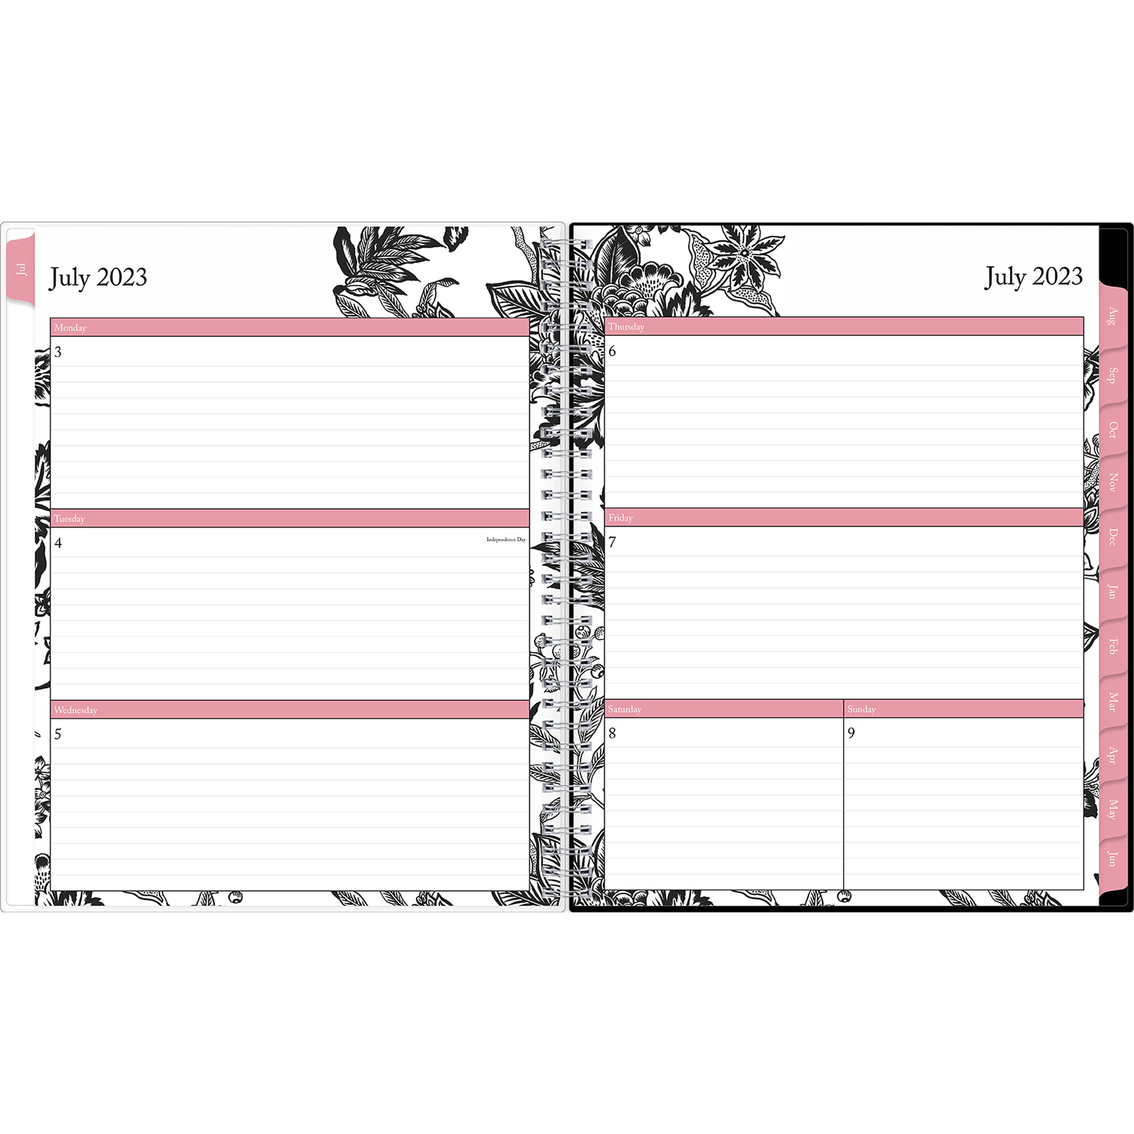 Blue Sky Analeis Create Your Own 8.5 in. x 11 in. Weekly and Monthly Planner - Image 3 of 3